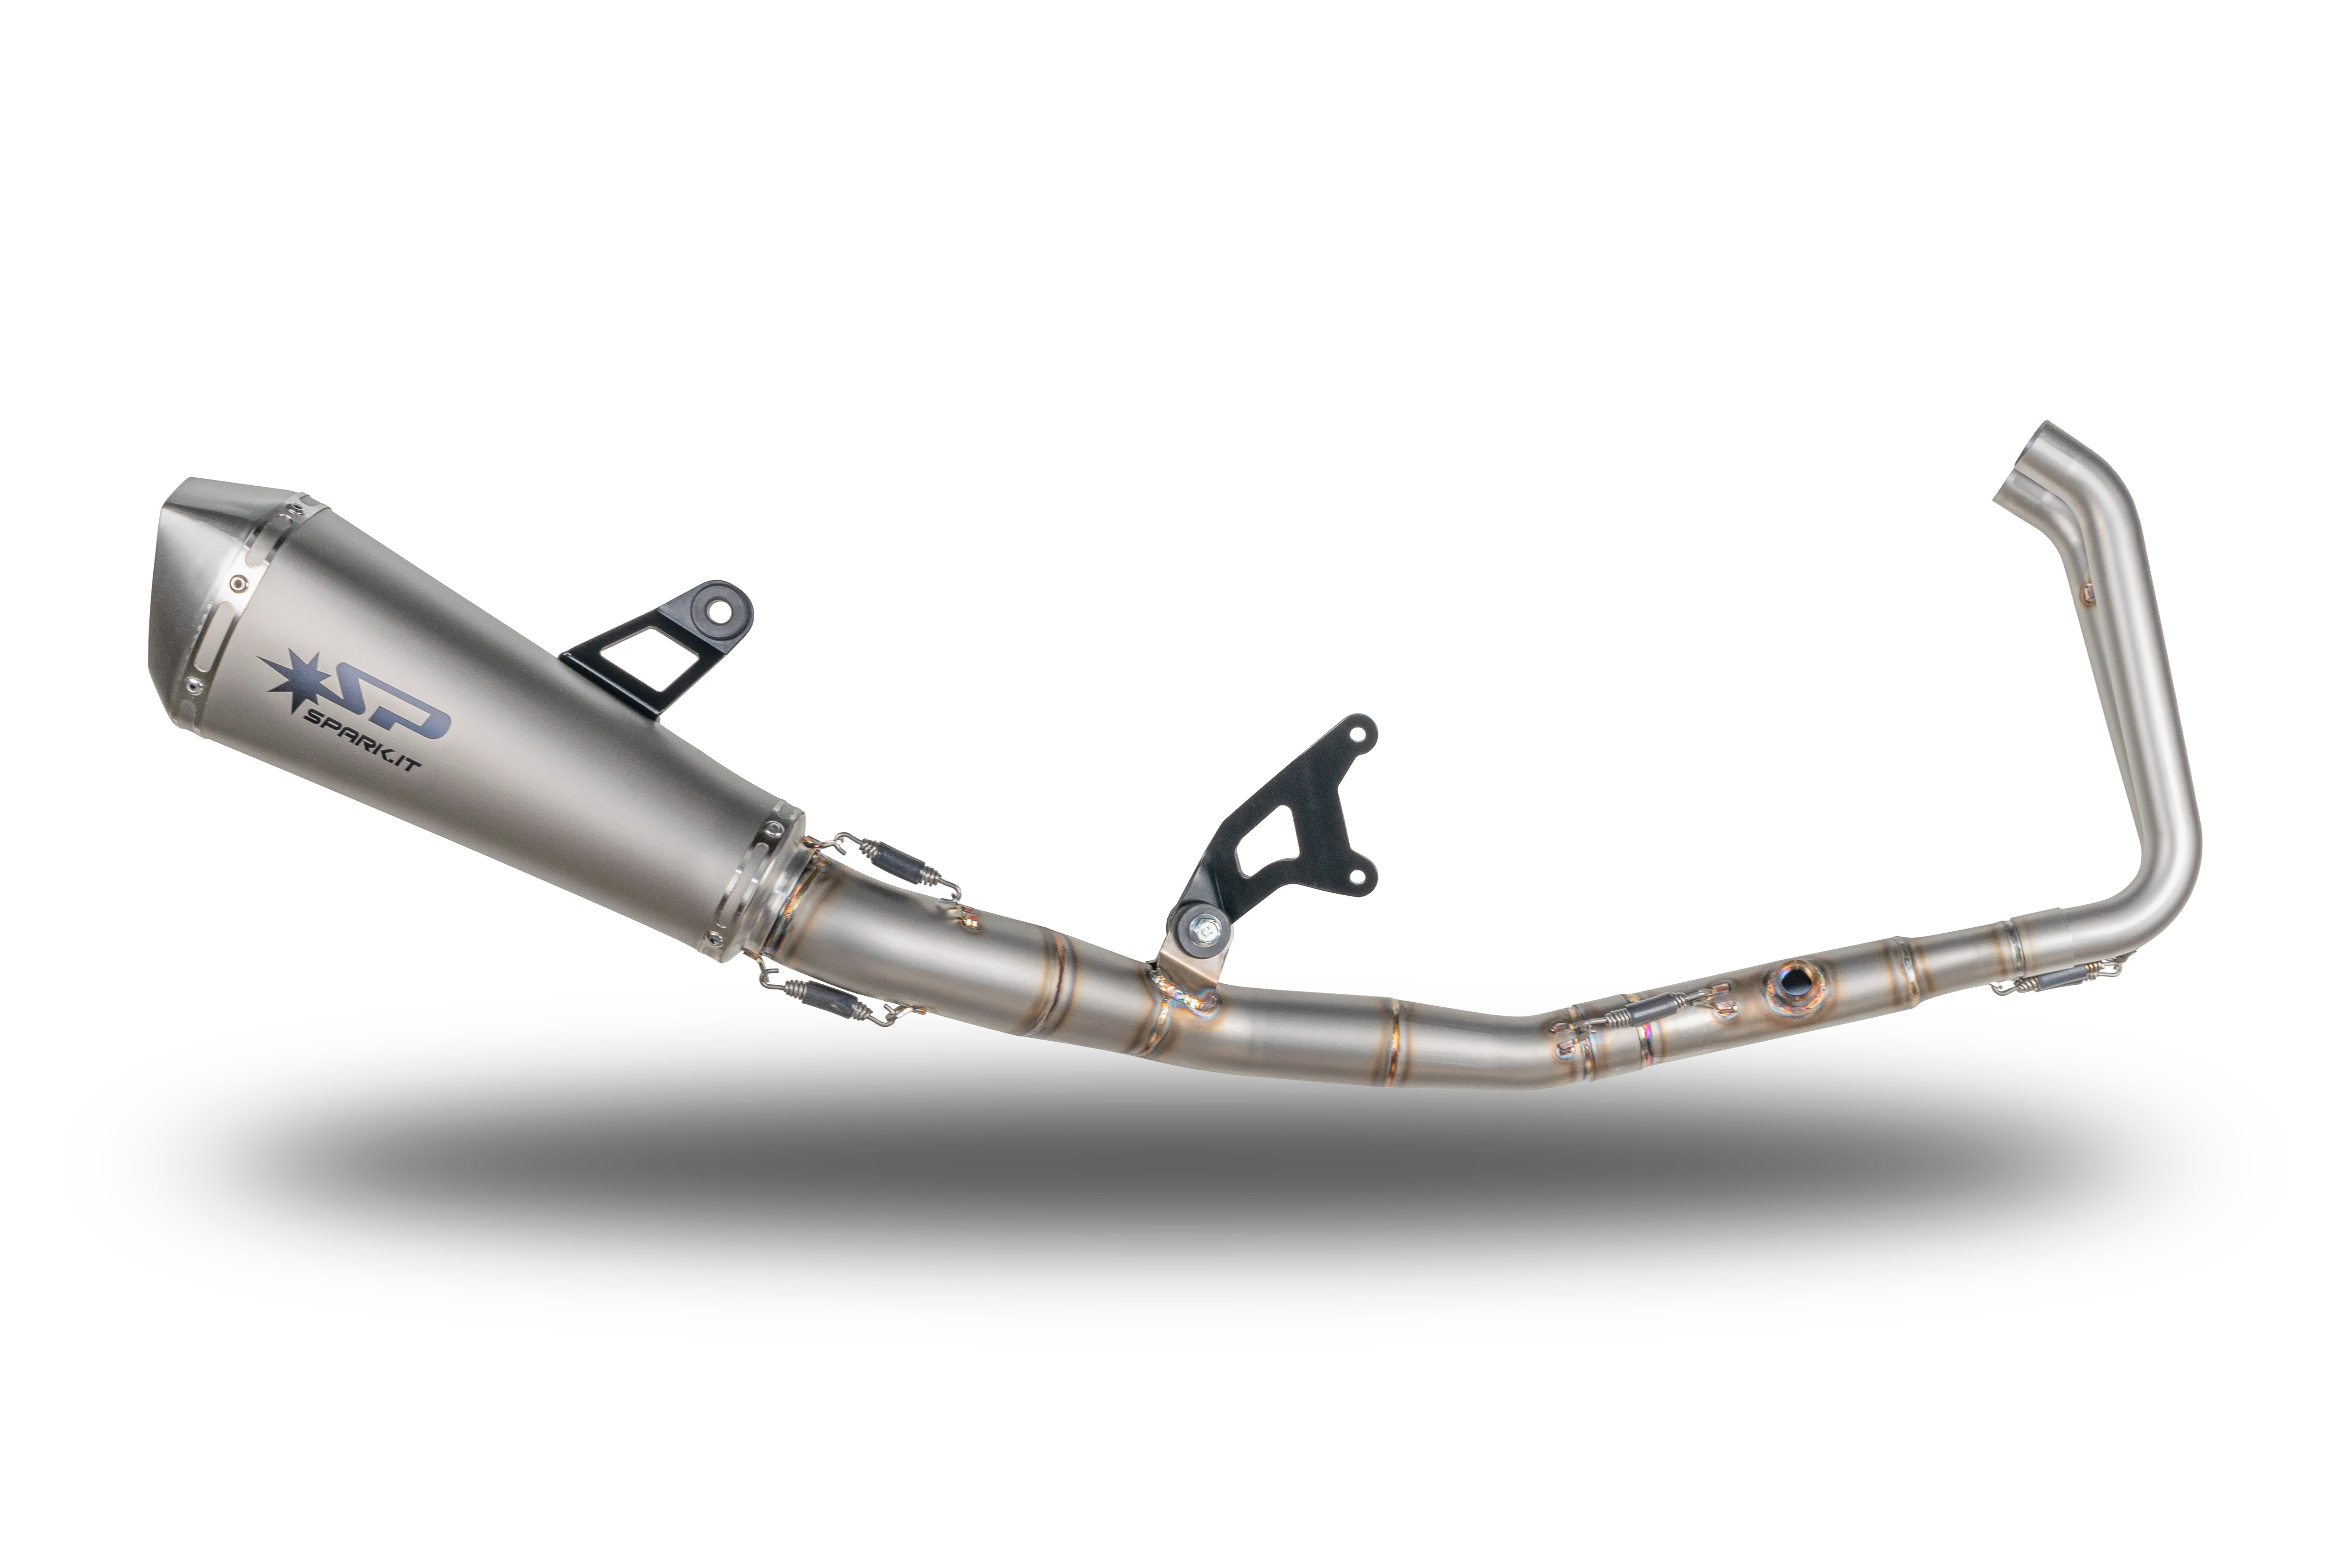 Racing full exhaust system for Ninja 400 | Spark Exhaust